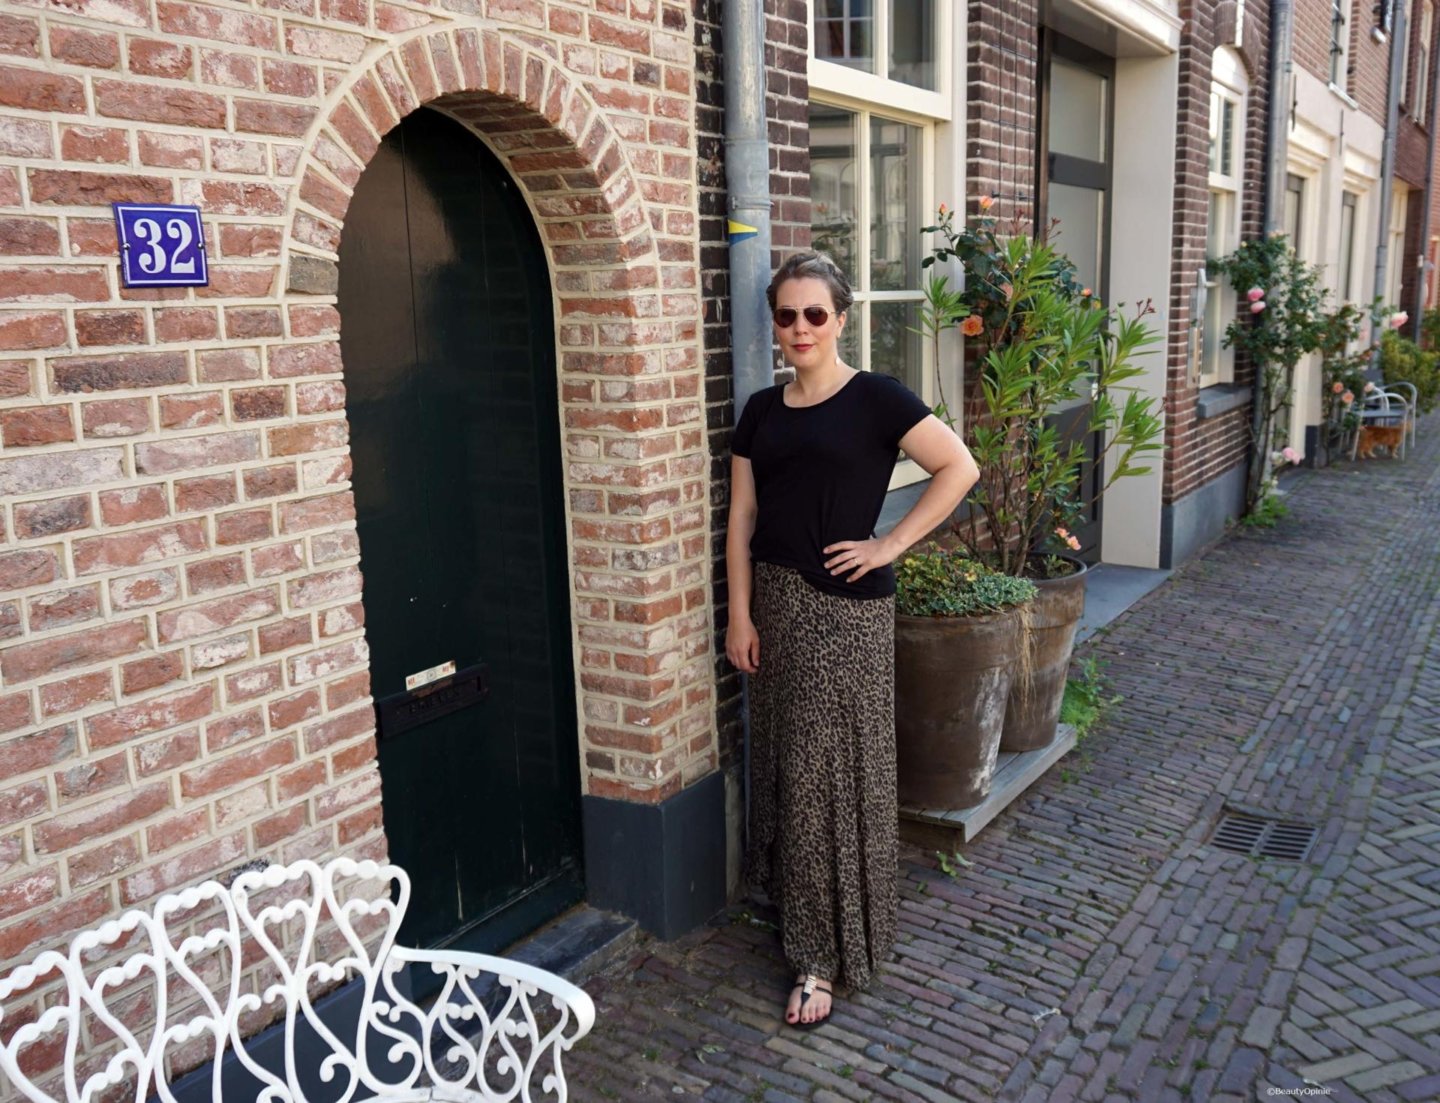 zomerse outfit of the day met rok van costes